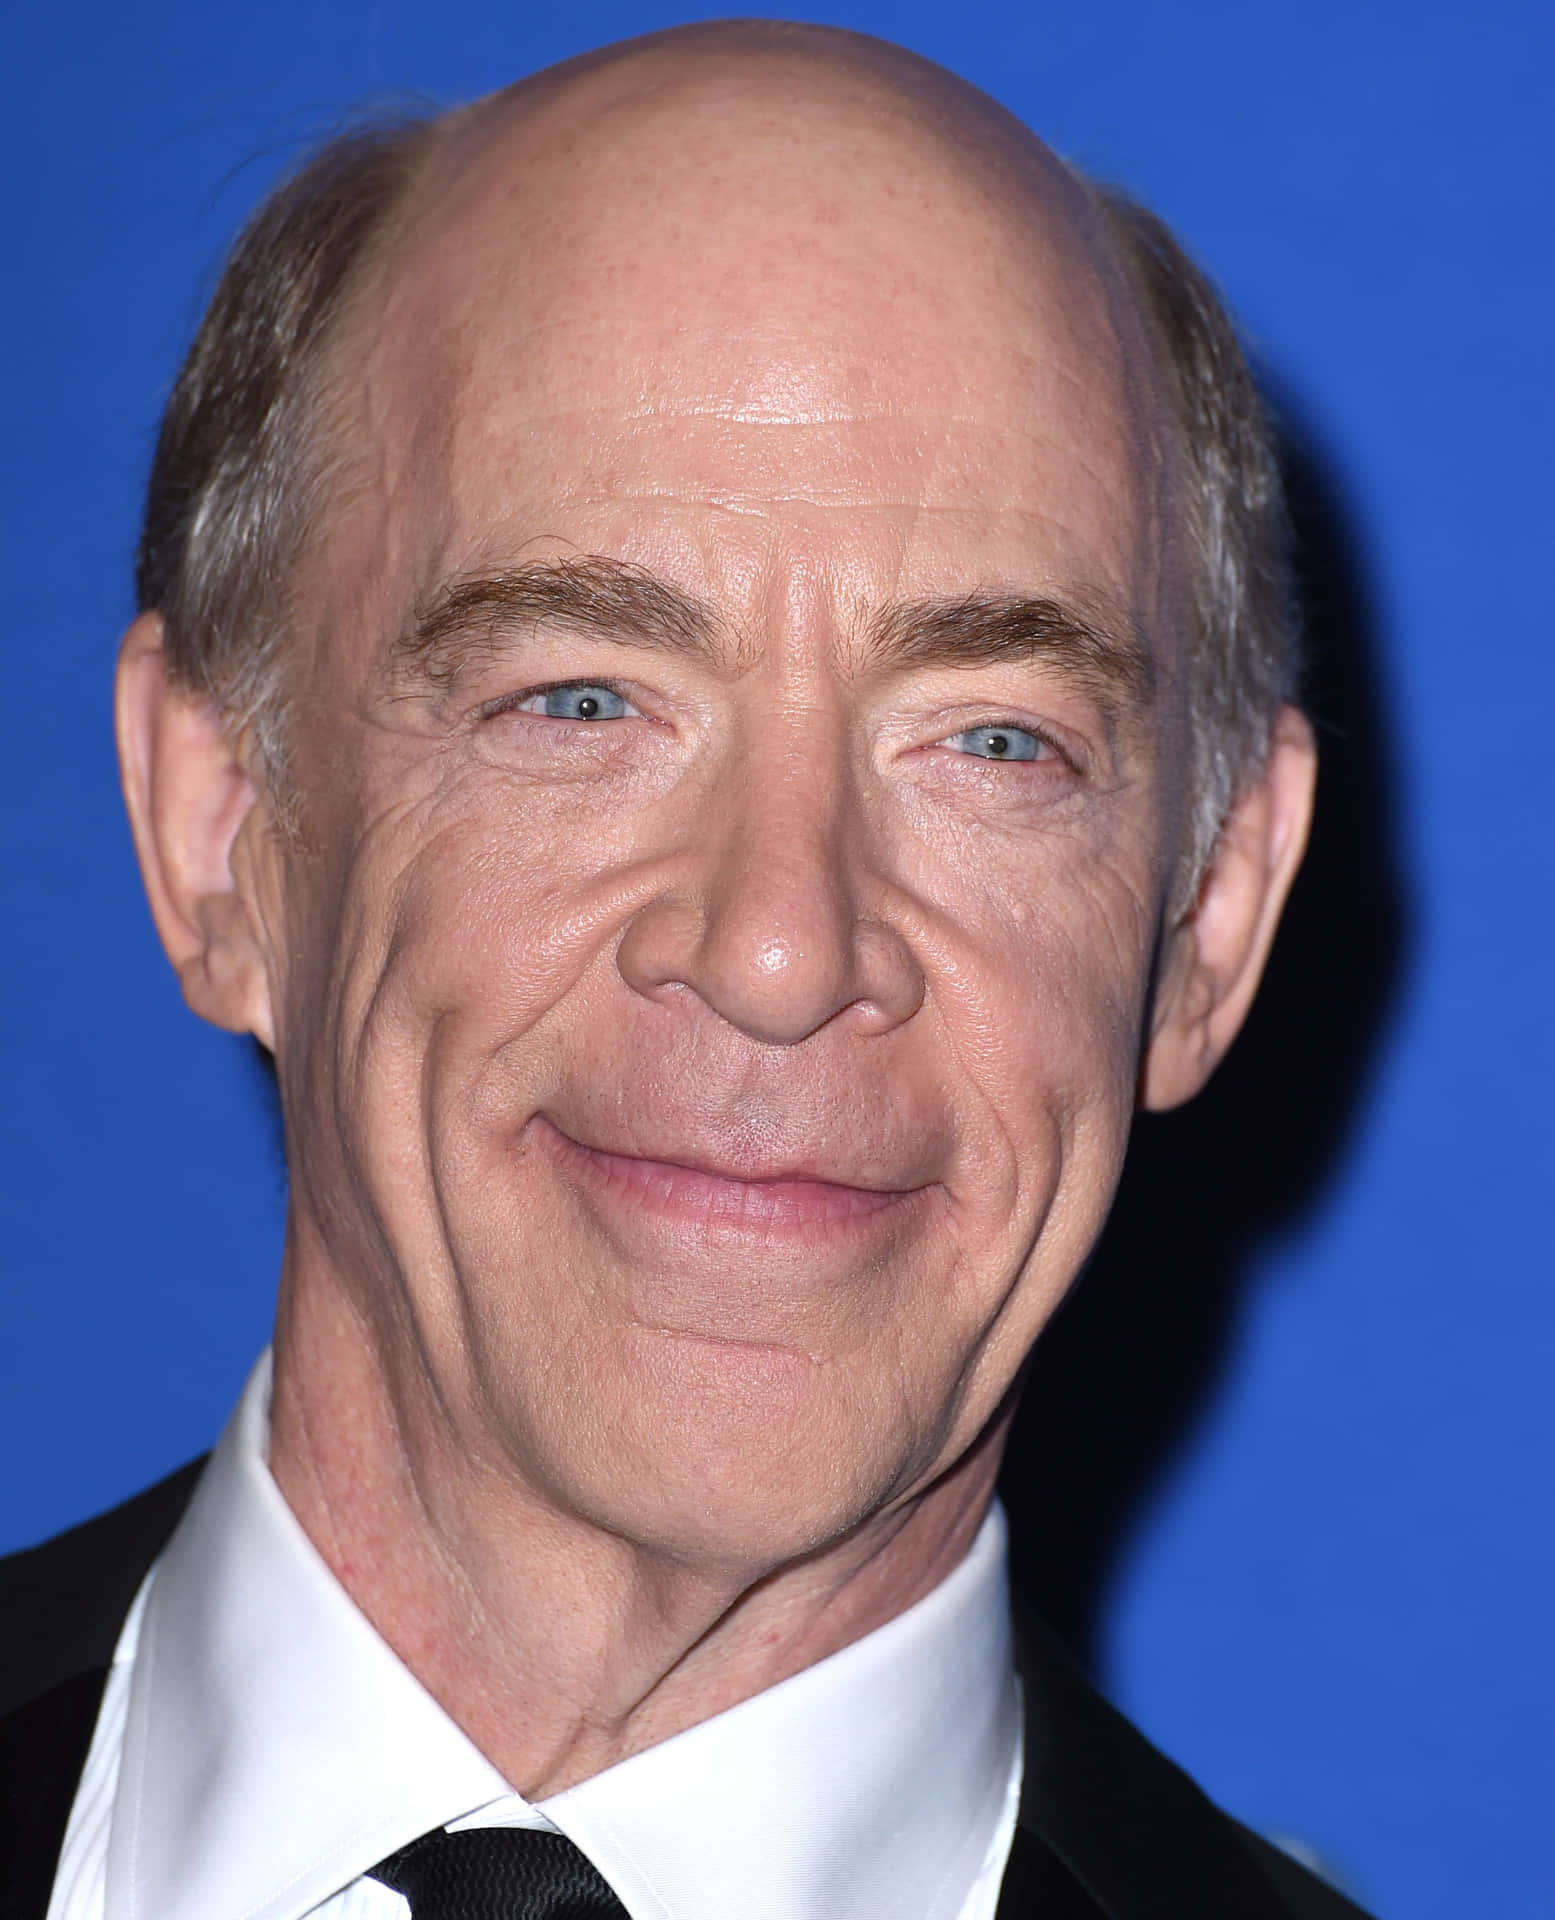 Established actor J.K. Simmons in a thoughtful portrait Wallpaper